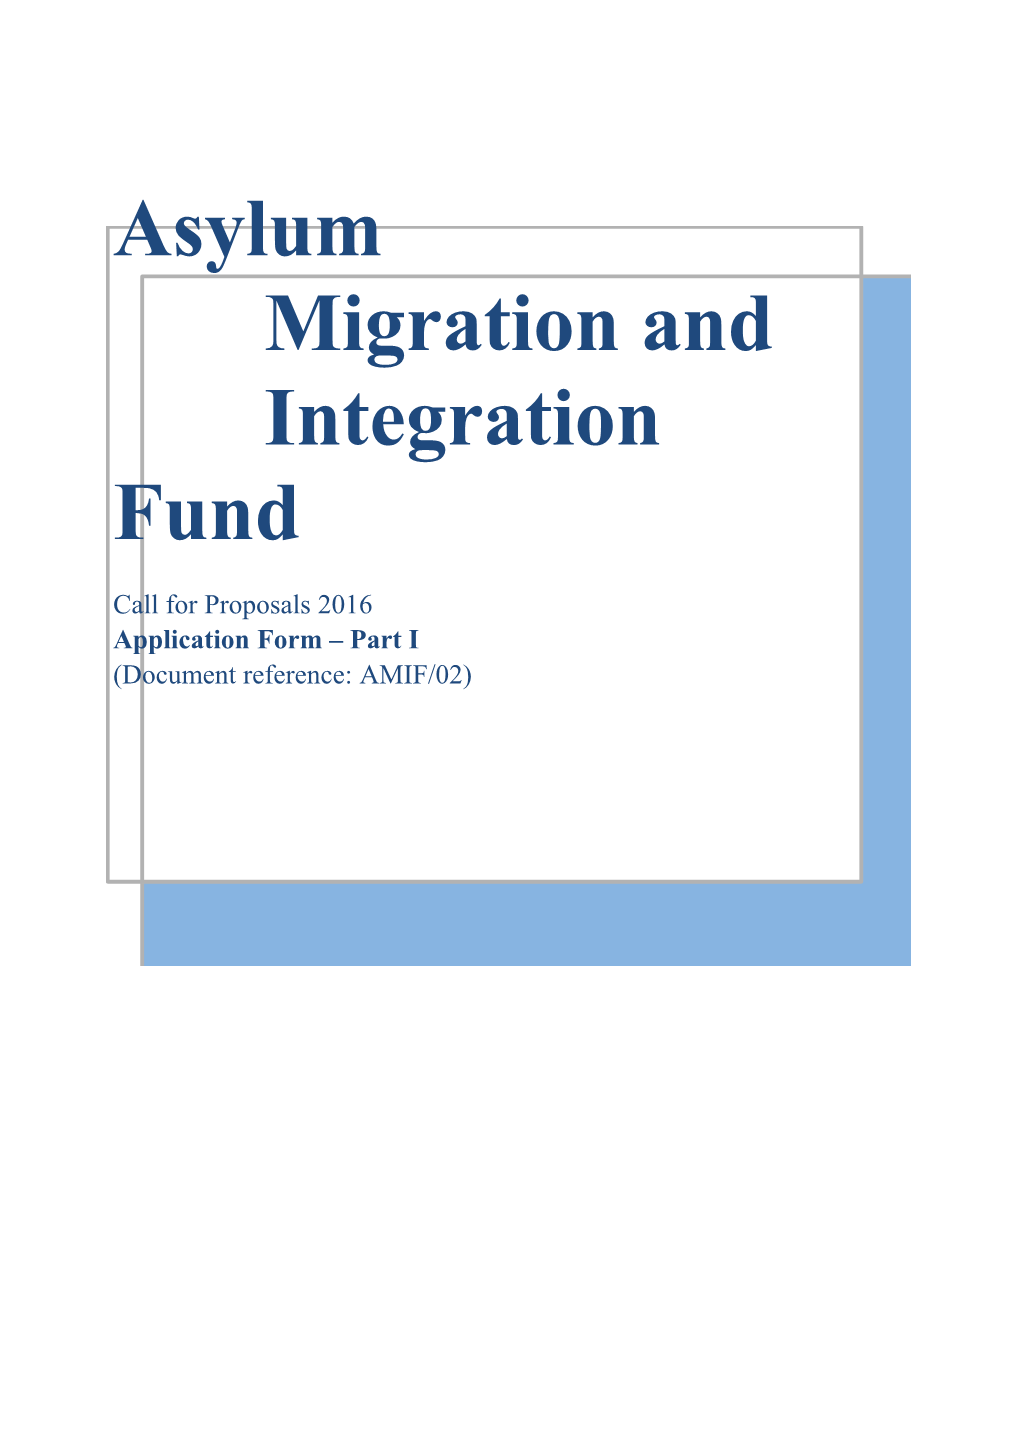 Page 1 of 23 Asylum, Migration and Integration Fund Application Form Part 1 AMIF/02